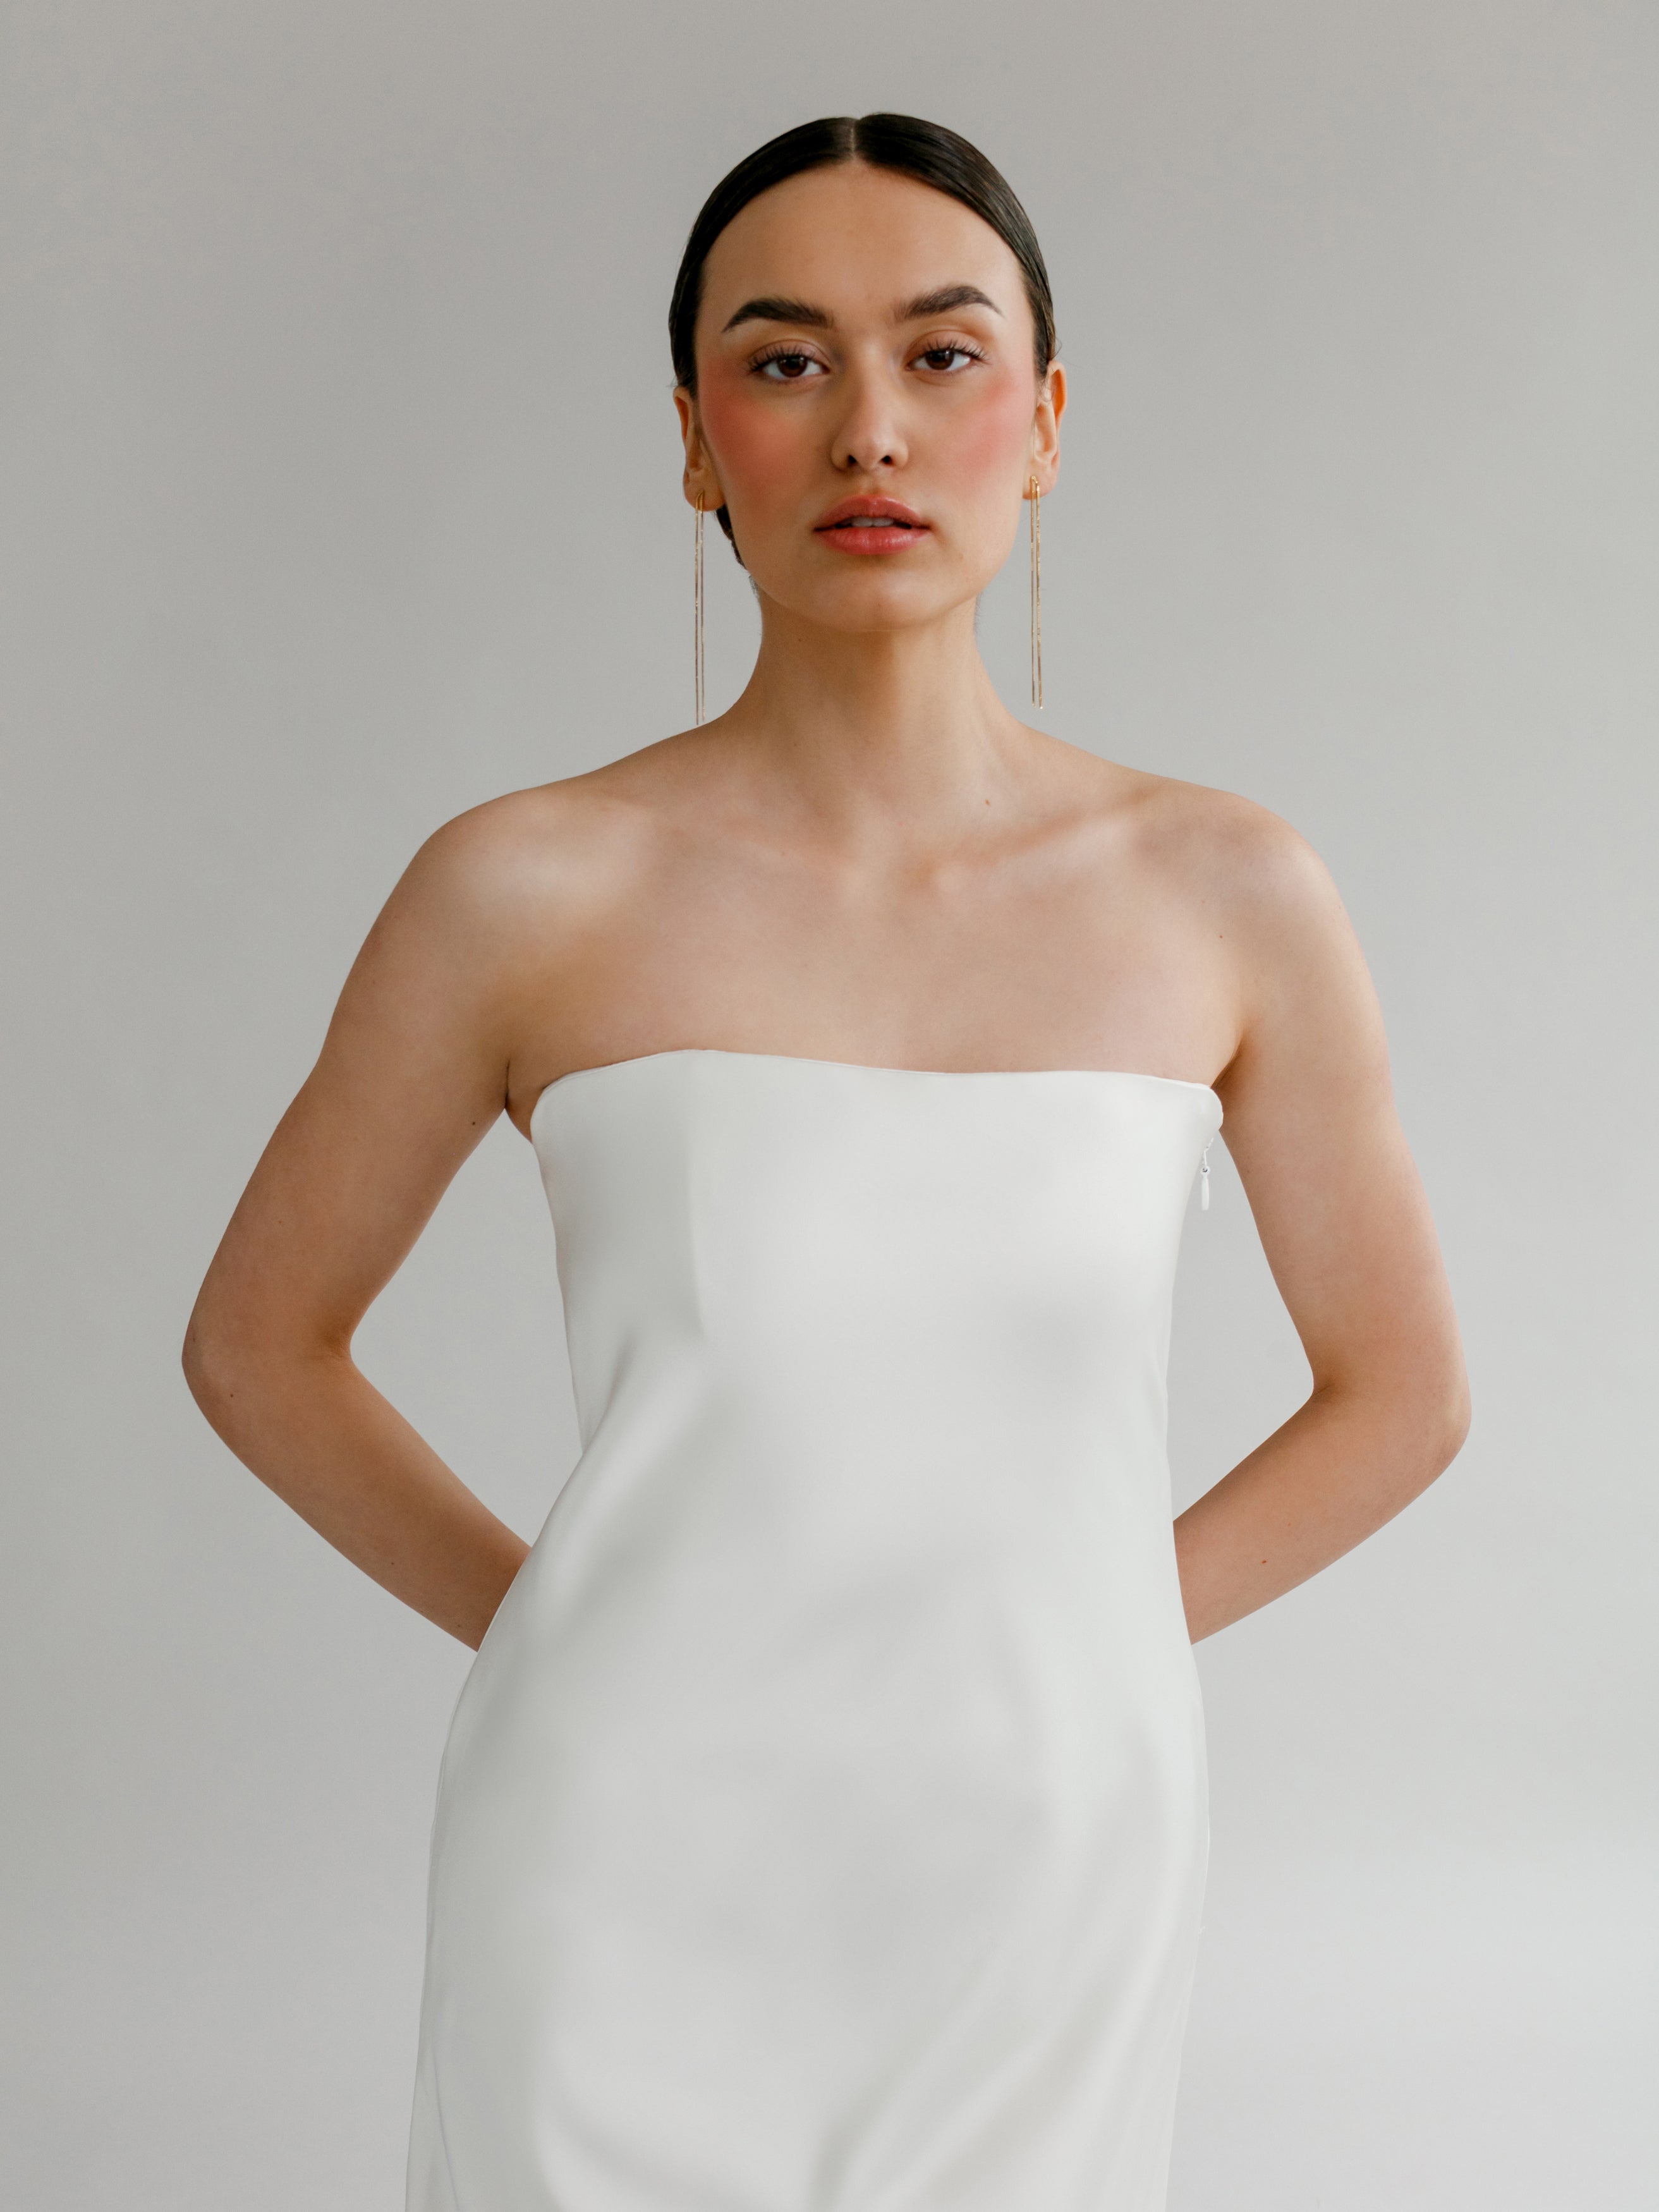 Leonora : A strapless, bias-cut wedding gown with a small train